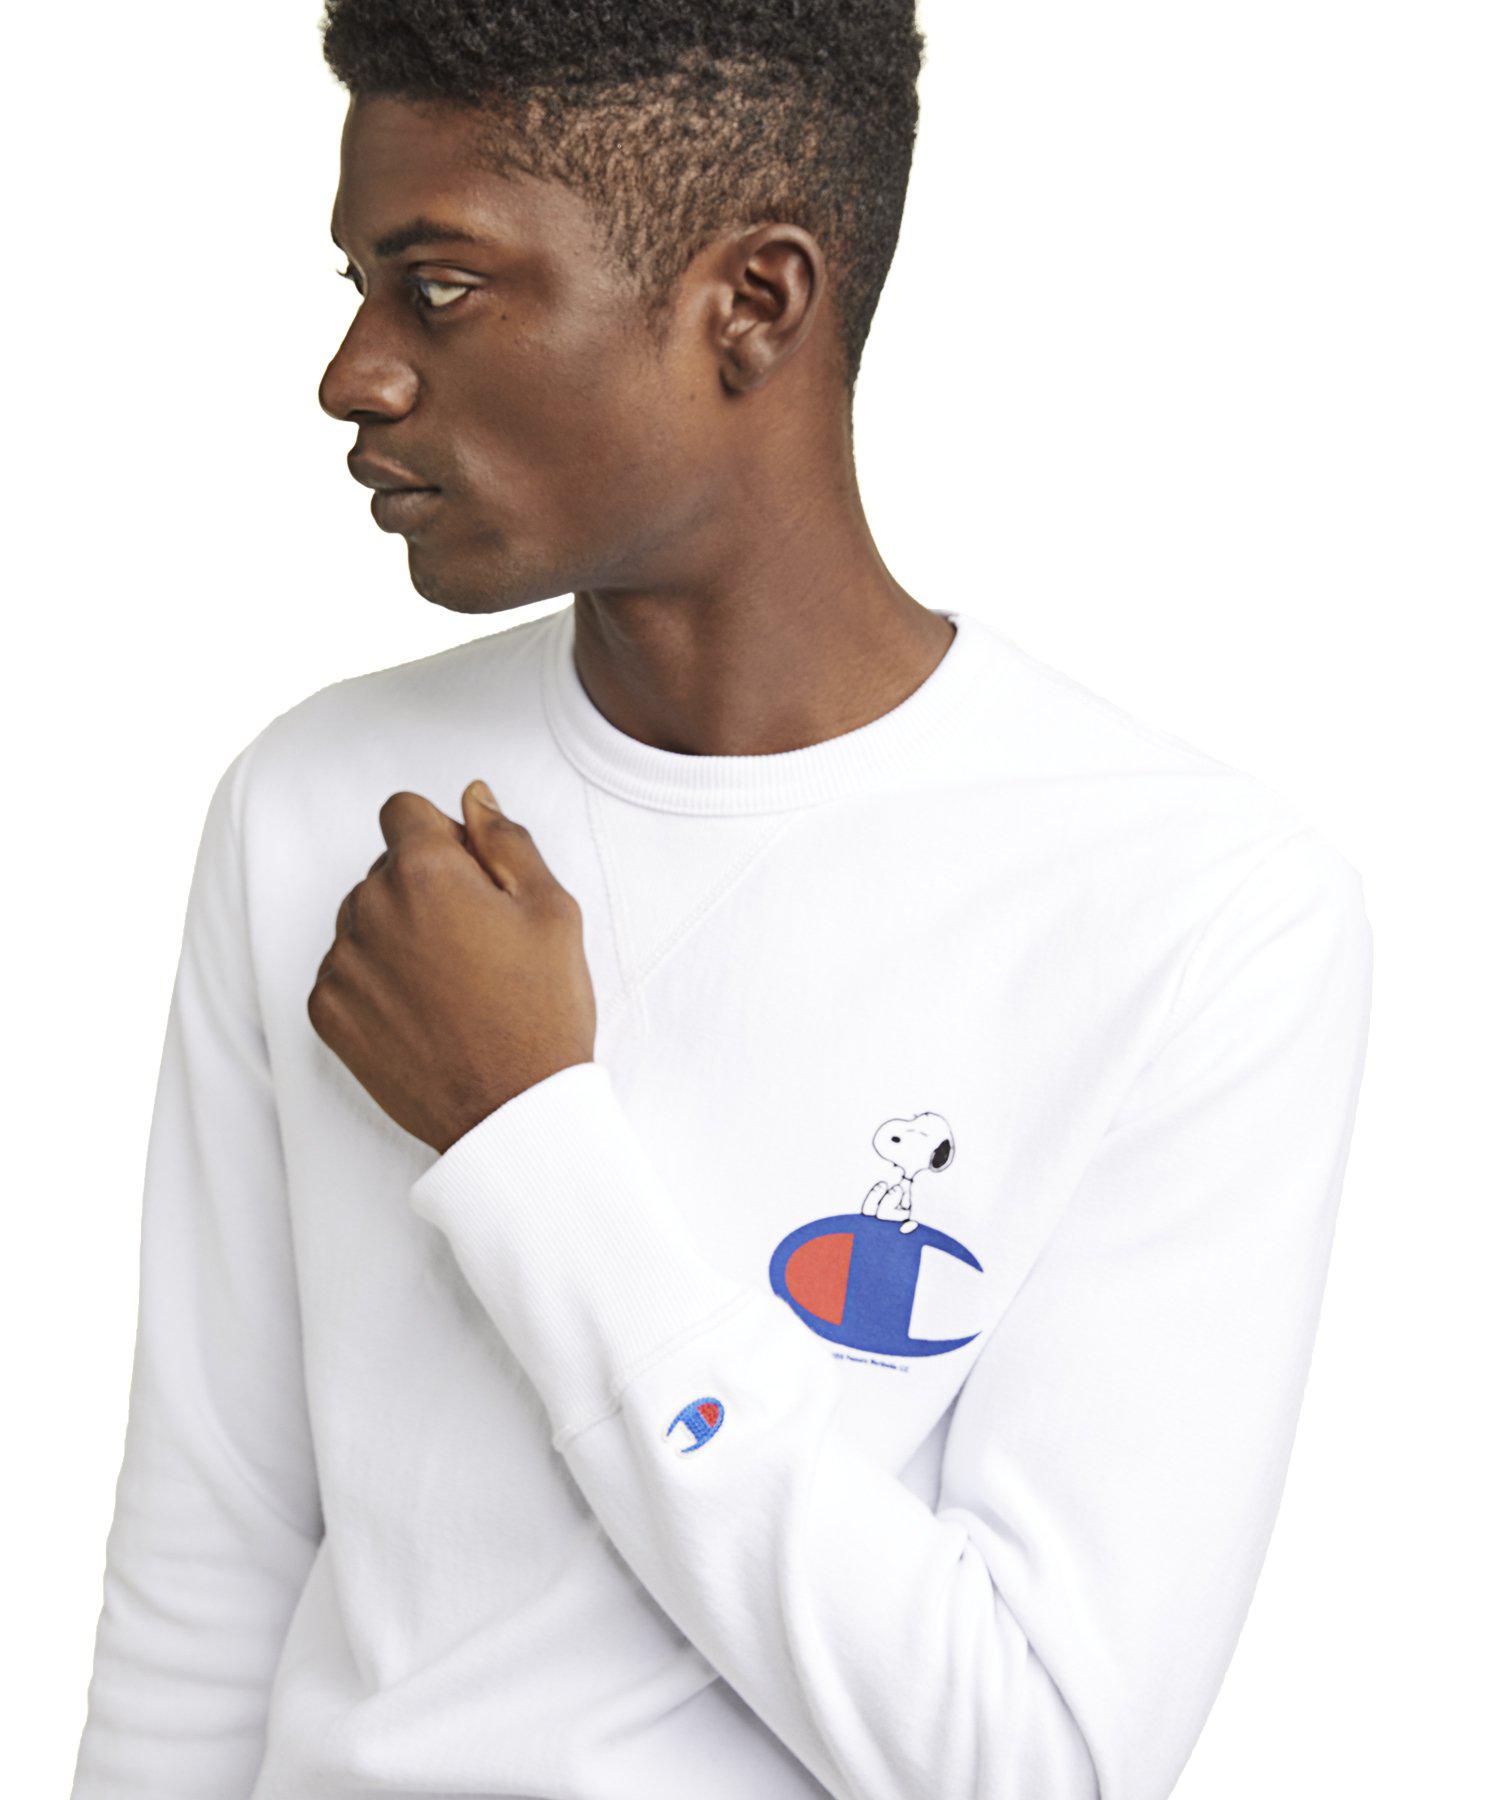 Todd Snyder Cotton X Peanuts Snoopy C Sweatshirt In White for Men - Lyst